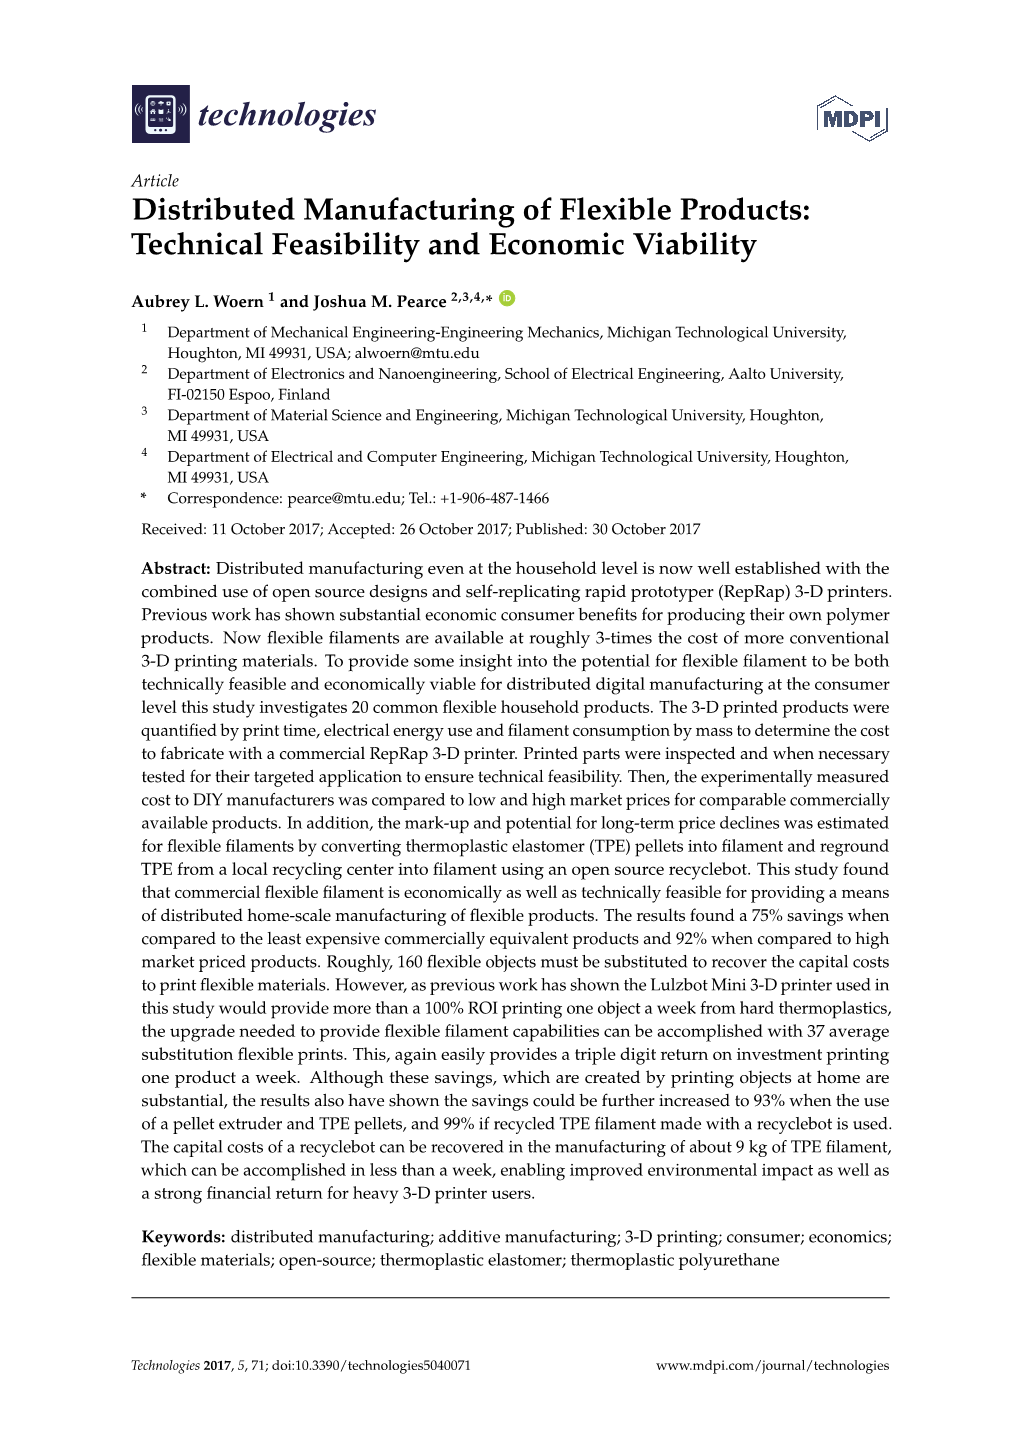 Distributed Manufacturing of Flexible Products: Technical Feasibility and Economic Viability